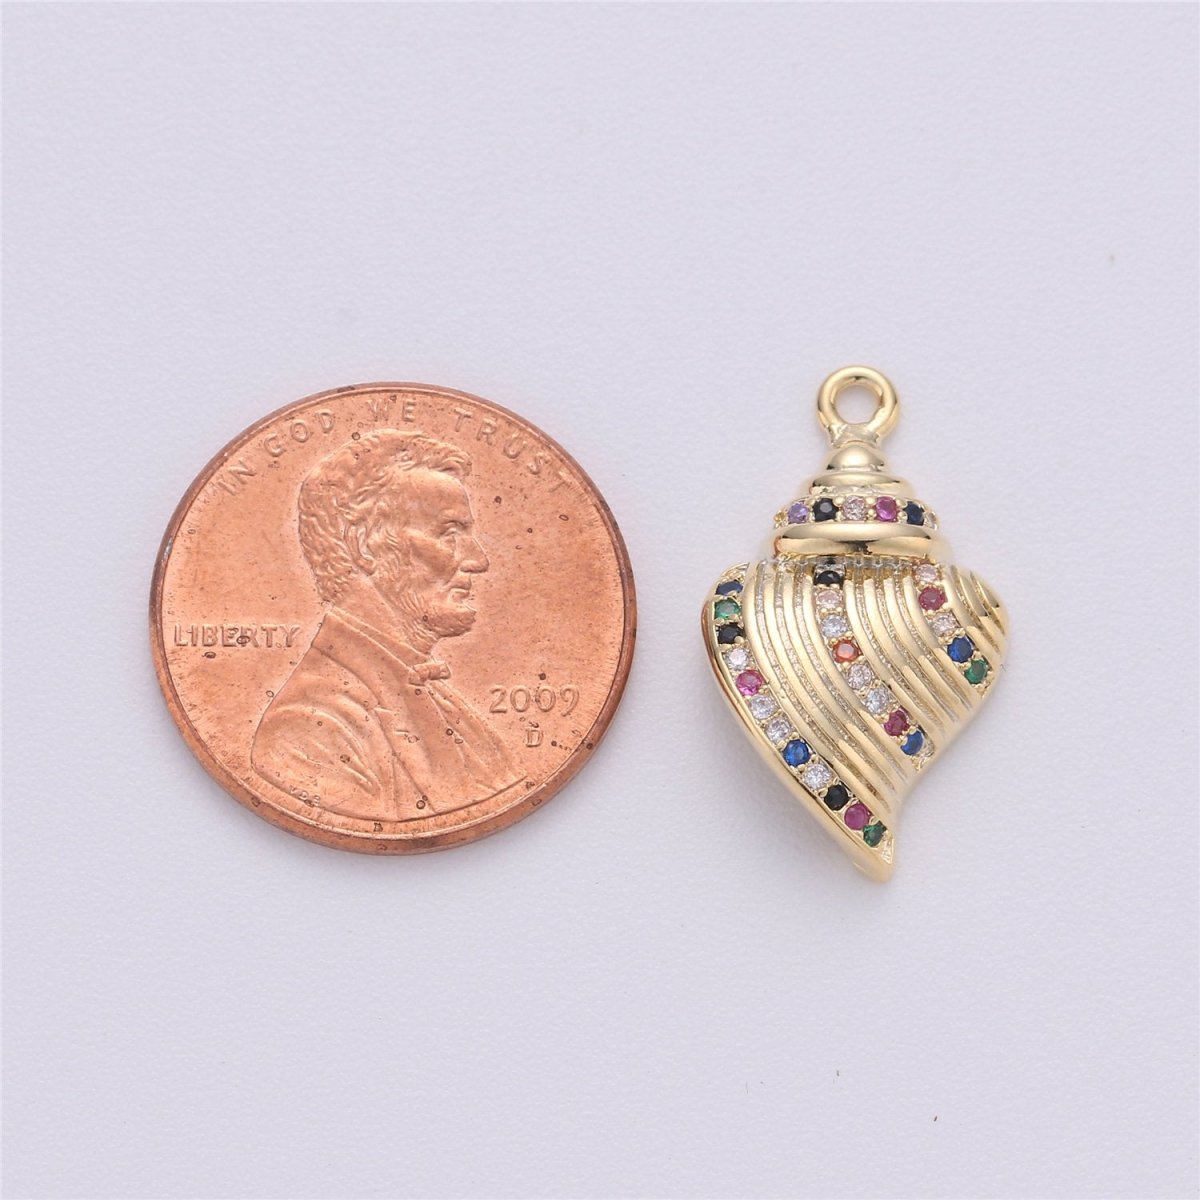 Tiny Conch Shell 14k Gold Filled Pendant Charm with Multi Color CZ Stone Rainbow Micro Pave Charm CZ StoneC-475 - DLUXCA